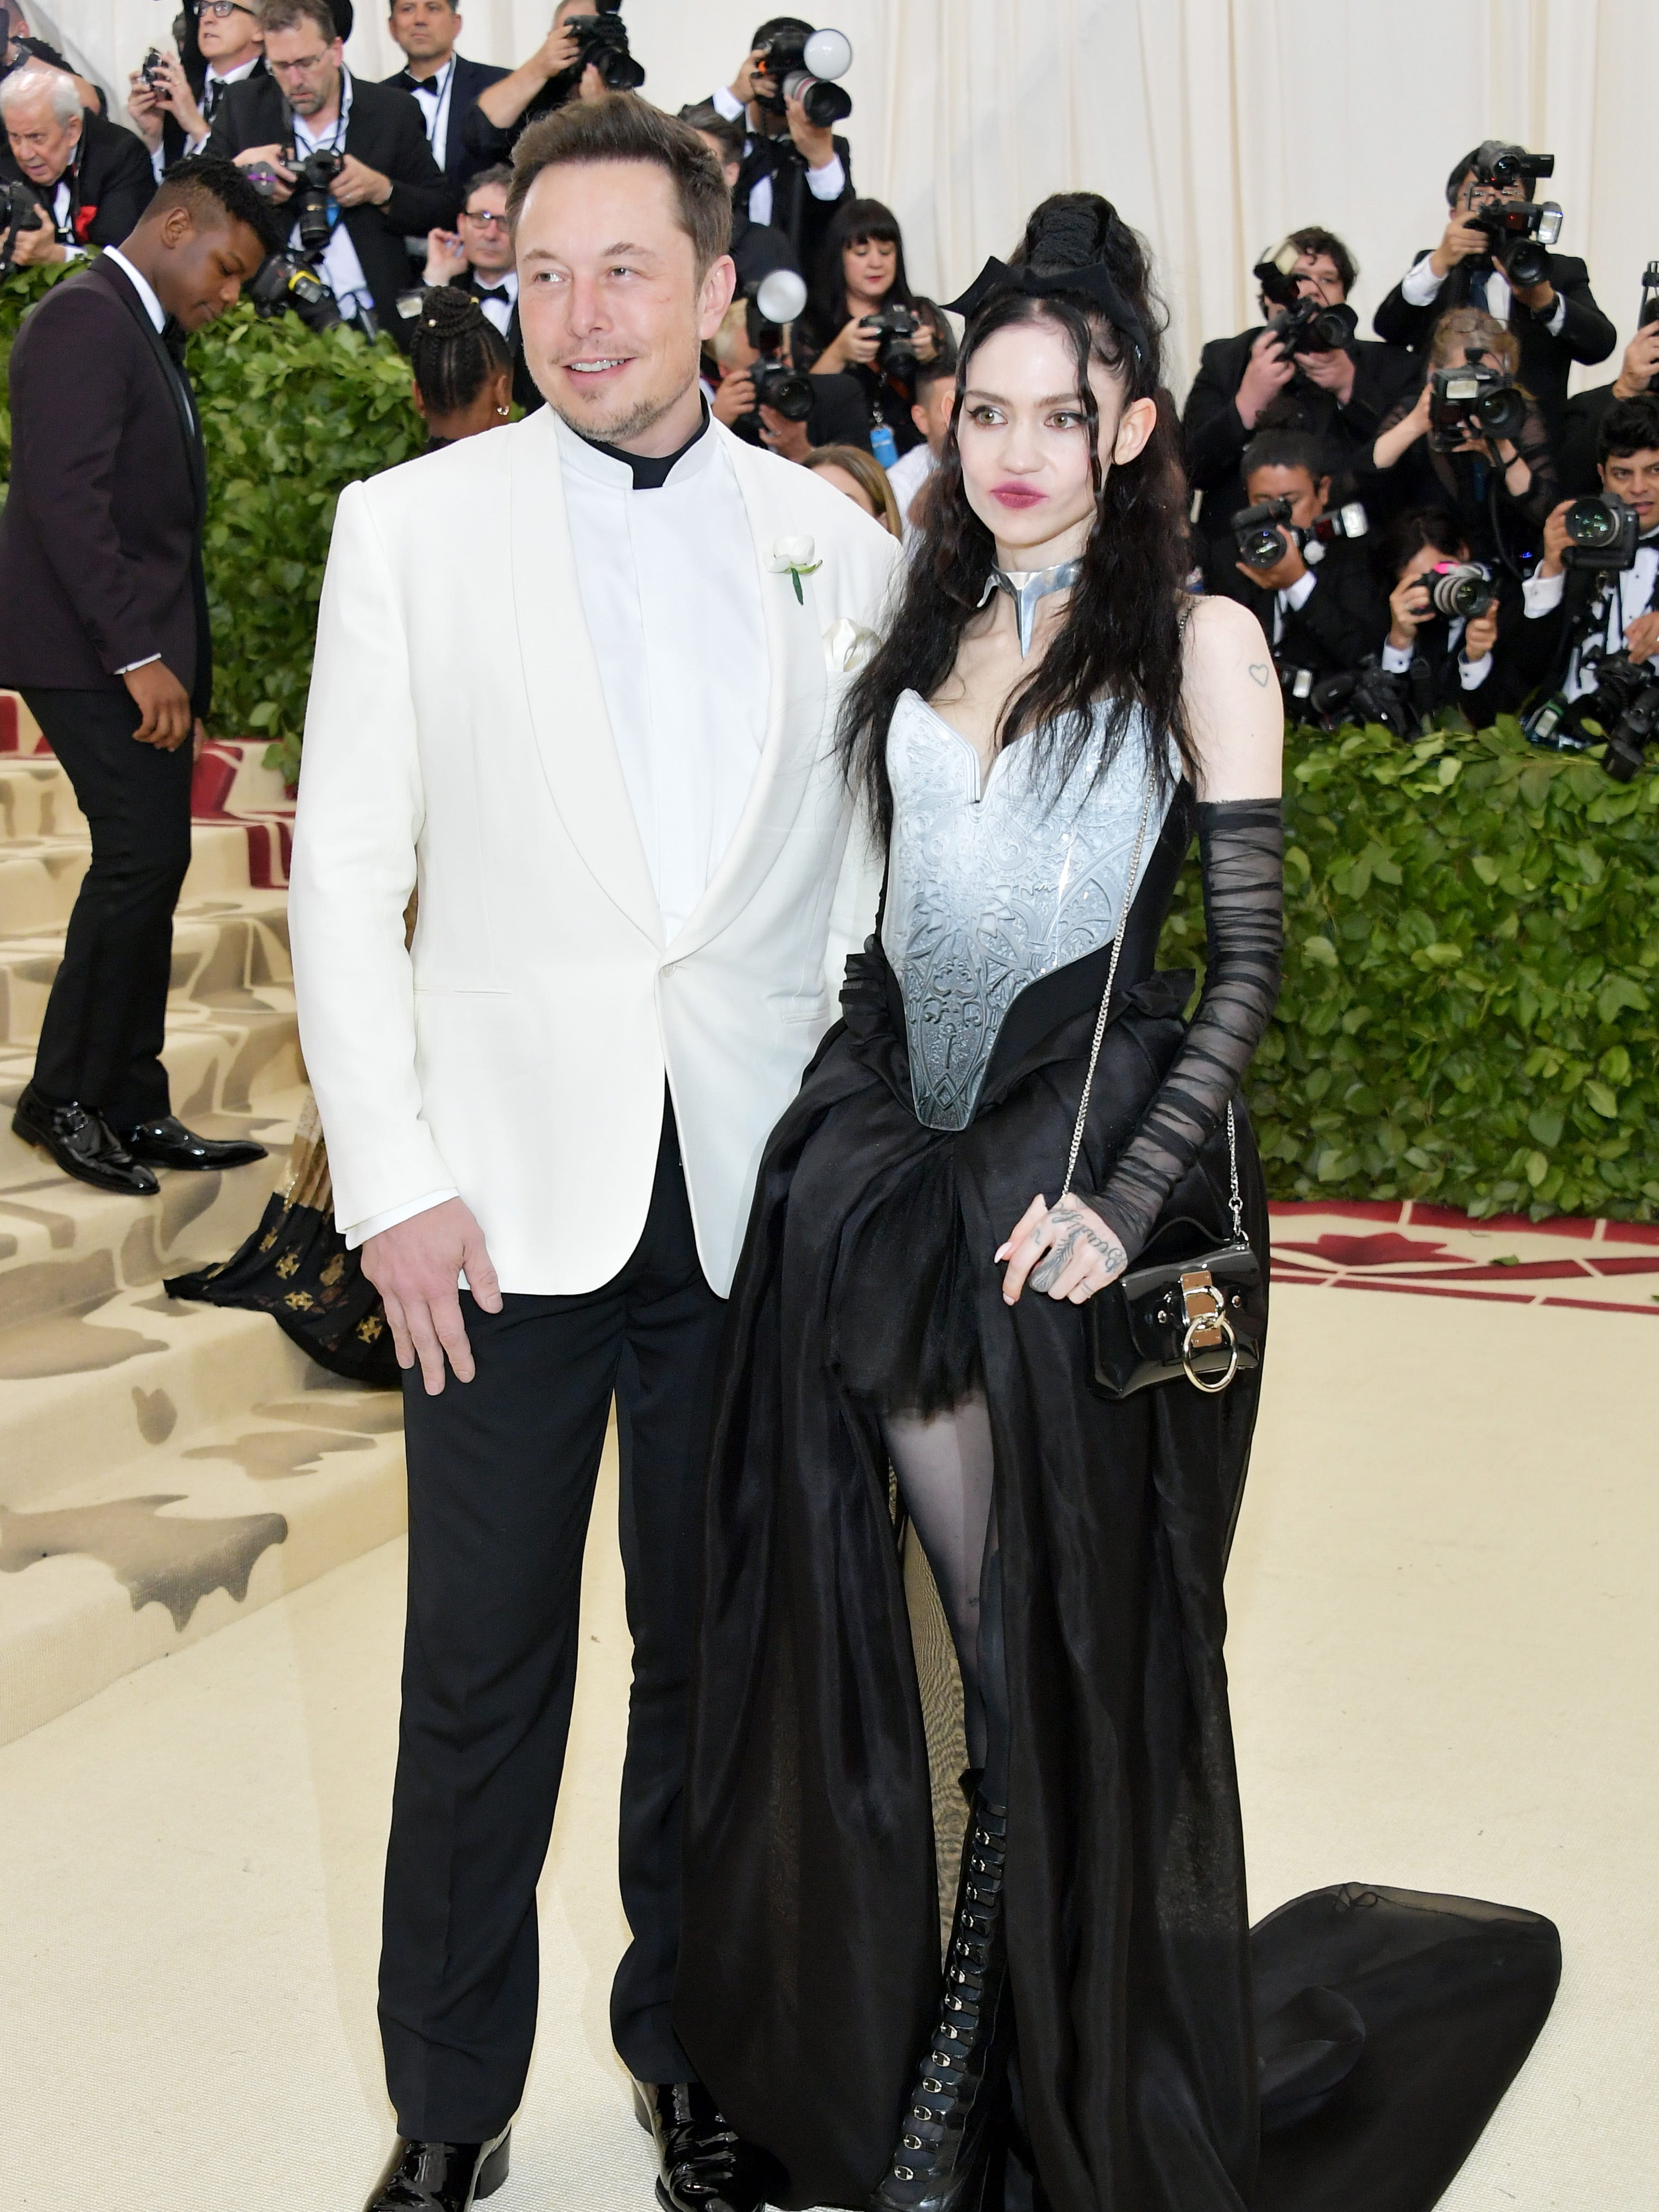 Met Gala Elon Musk And Grimes Make Red Carpet Debut As A Couple